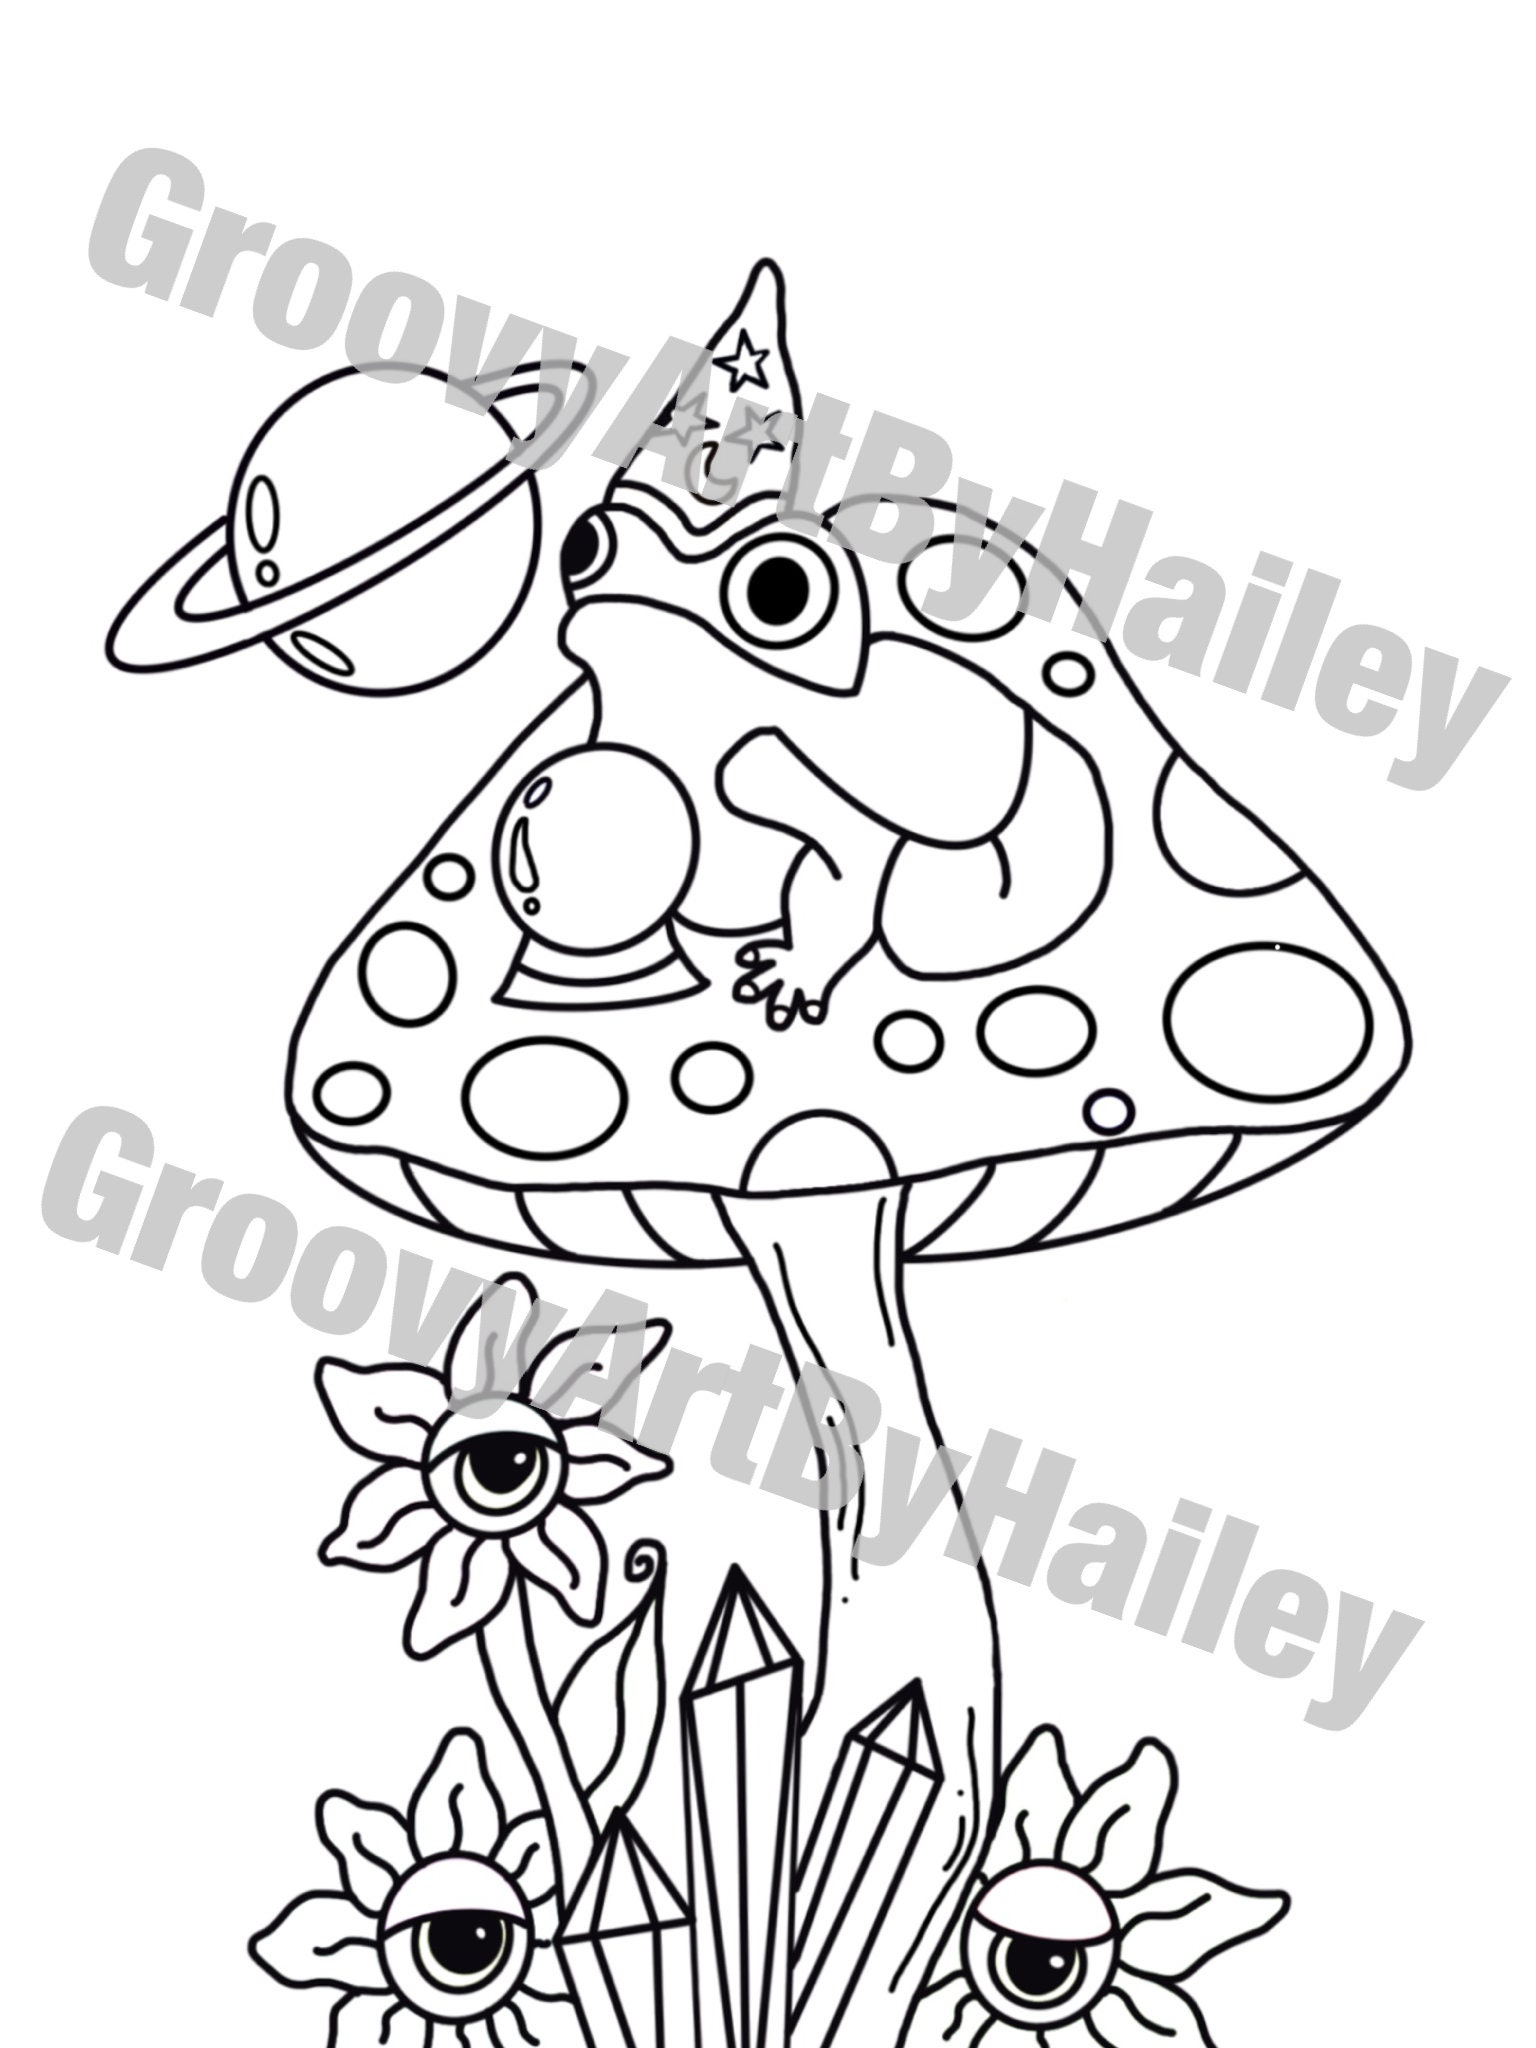 Frog wizard coloring page, instant download